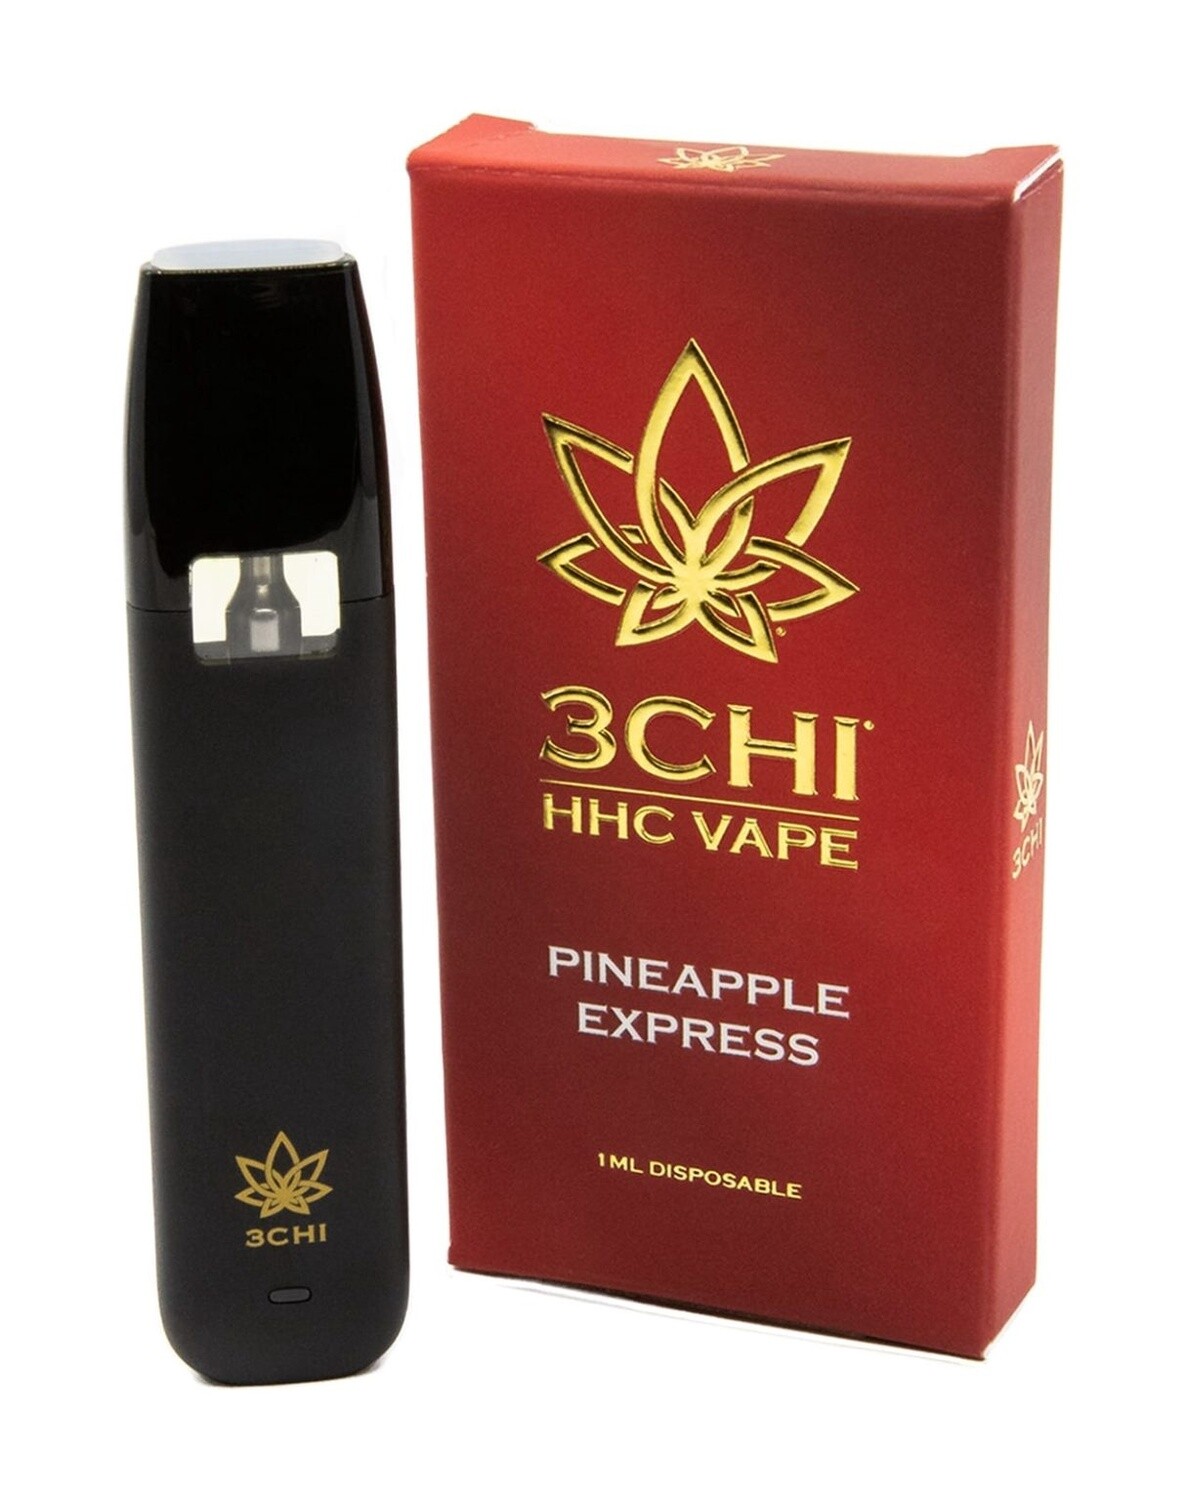 3CHI HHC Pineapple Express Disposable 1g